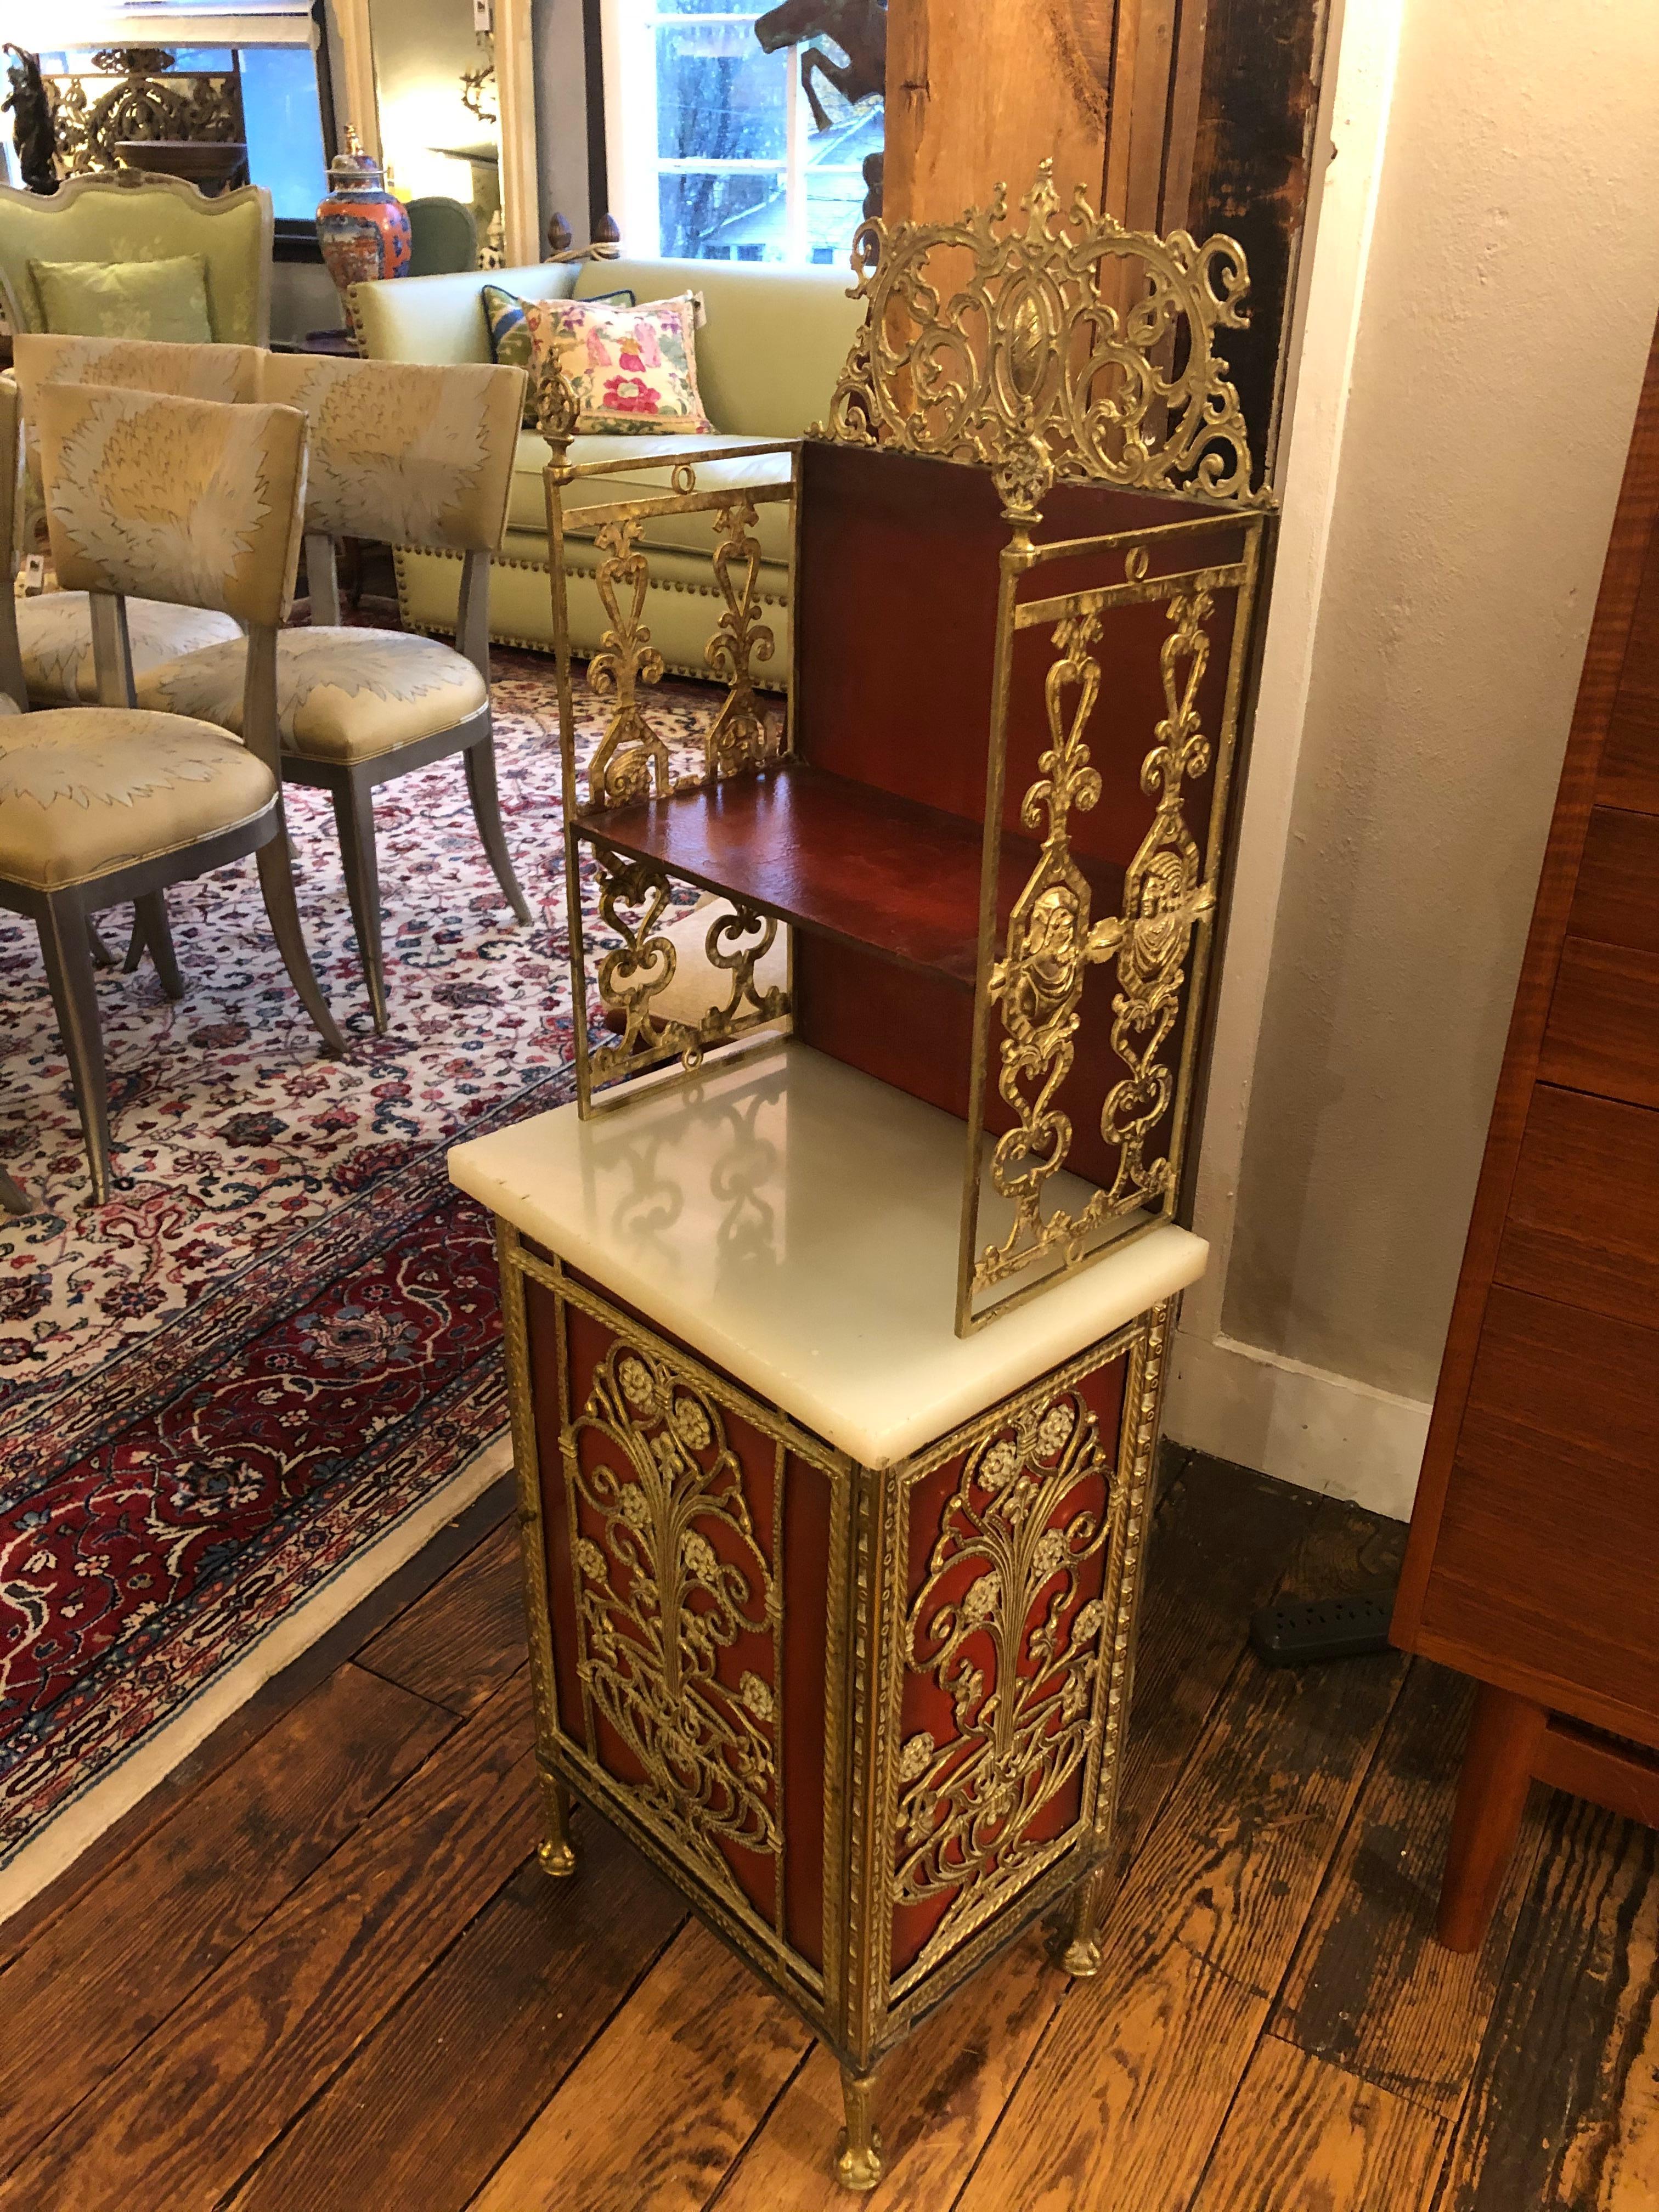 A rare gorgeous gem of a narrow elongated hall cabinet having ornate metal work over red metal structure, thick white onyx slab surface, one exterior shelf, and a door that opens to reveal storage inside. The interior also has two little metal doors